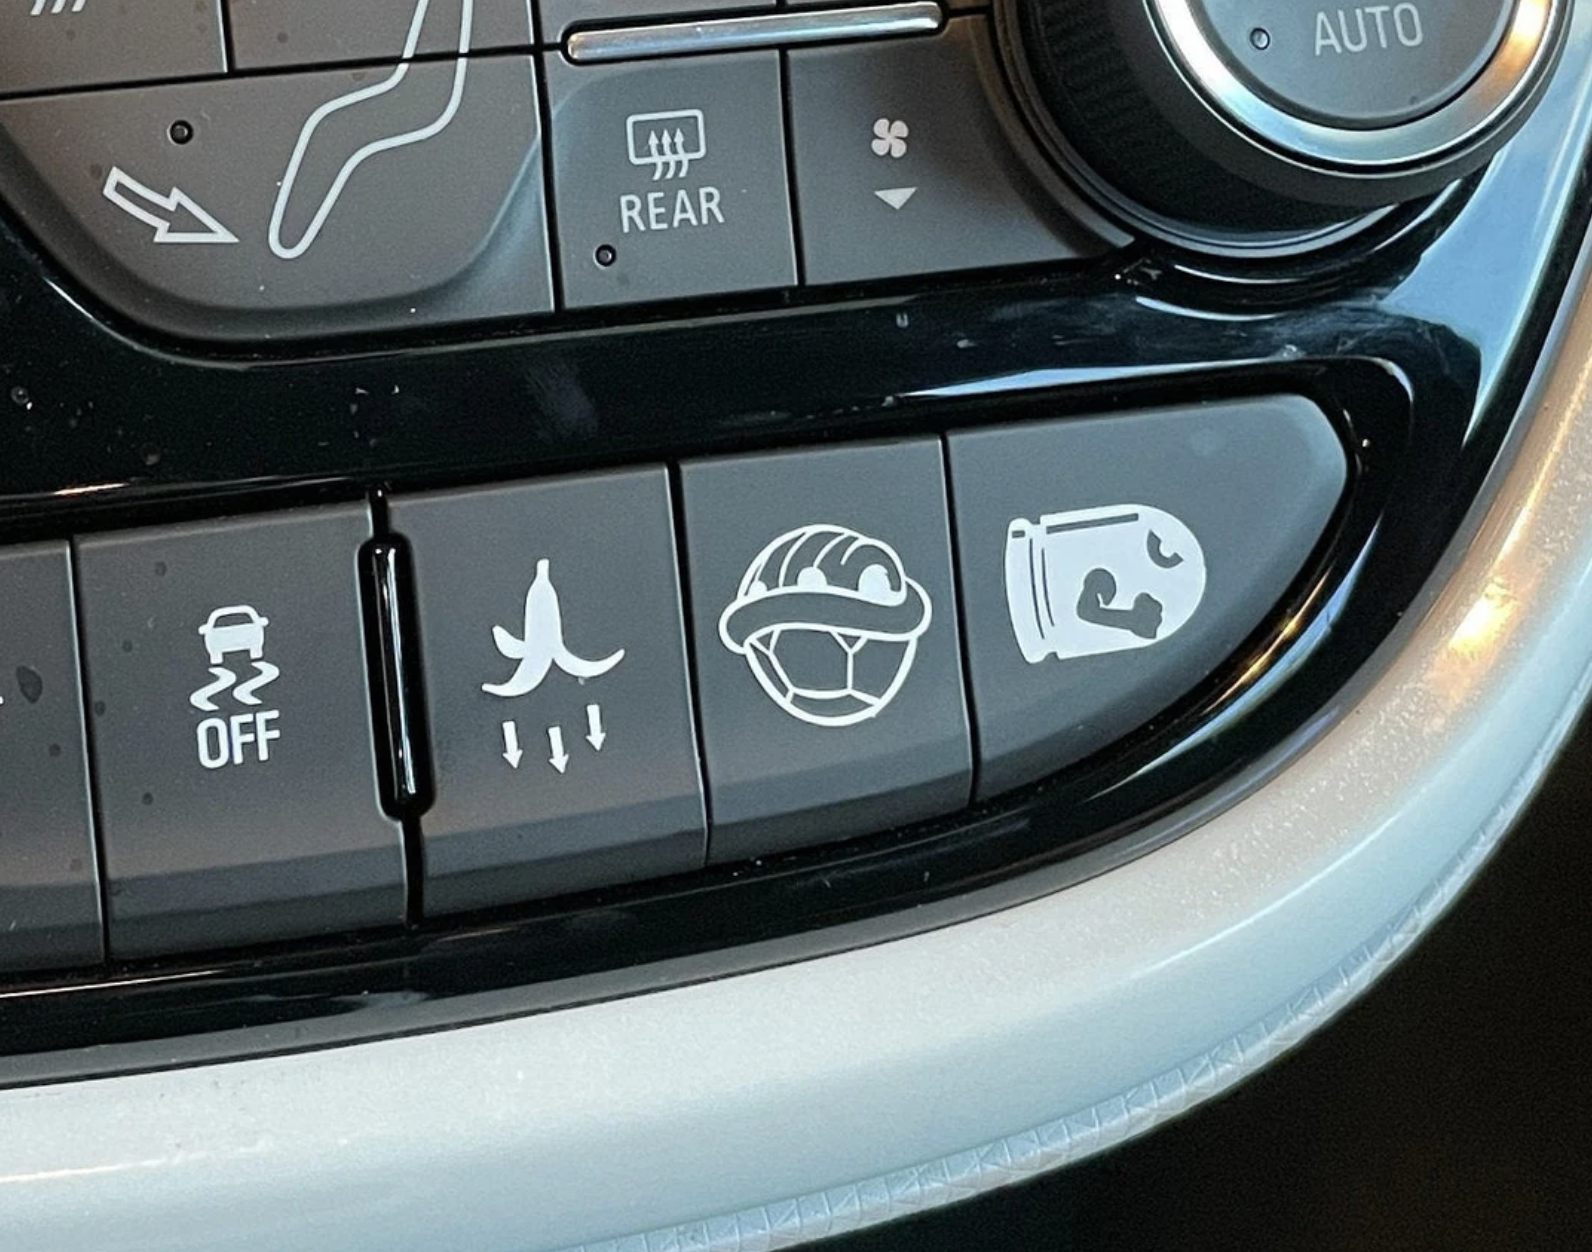 The banana, shell, and bullet decals on a car&#x27;s dashboard buttons